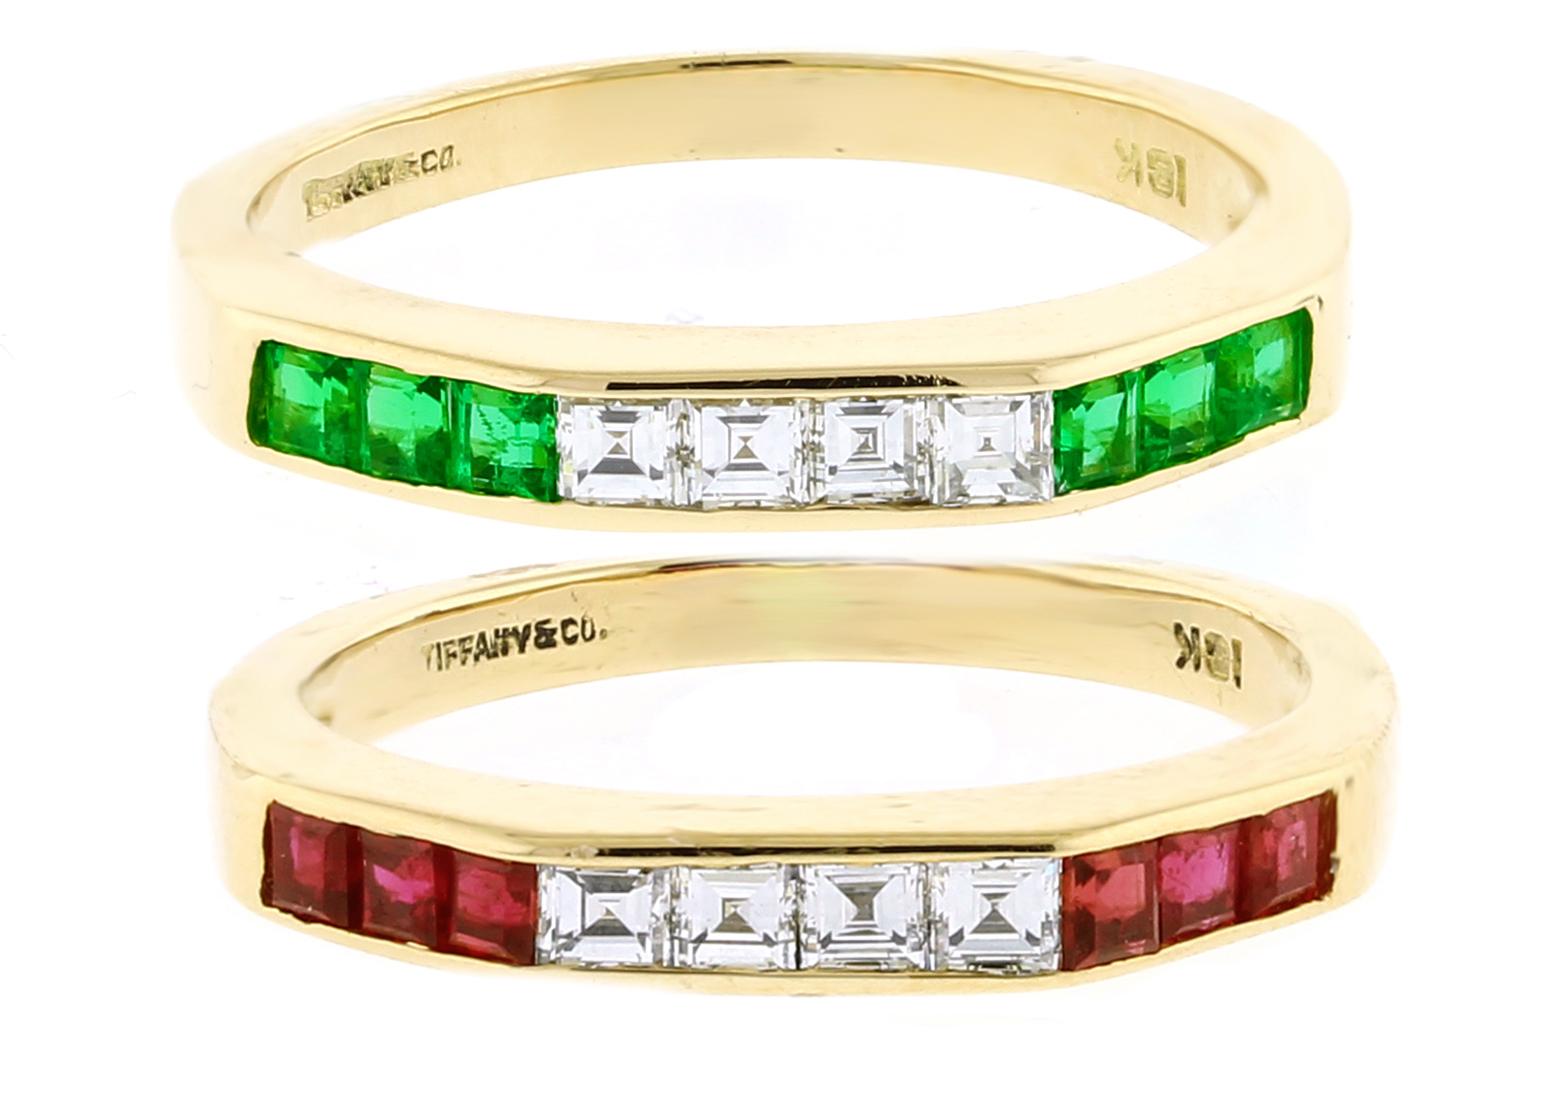 From Tiffany & Co., the ruby & diamond, and emerald & diamond stackable rings are a size 6.5.  
♦ Designer: Tiffany & Co.
♦ Metal: 18kt yellow gold
♦ Gemstone: Diamonds, Emeralds and Rubies
♦ Gemstone Weights: 6Emeralds=.30cts &